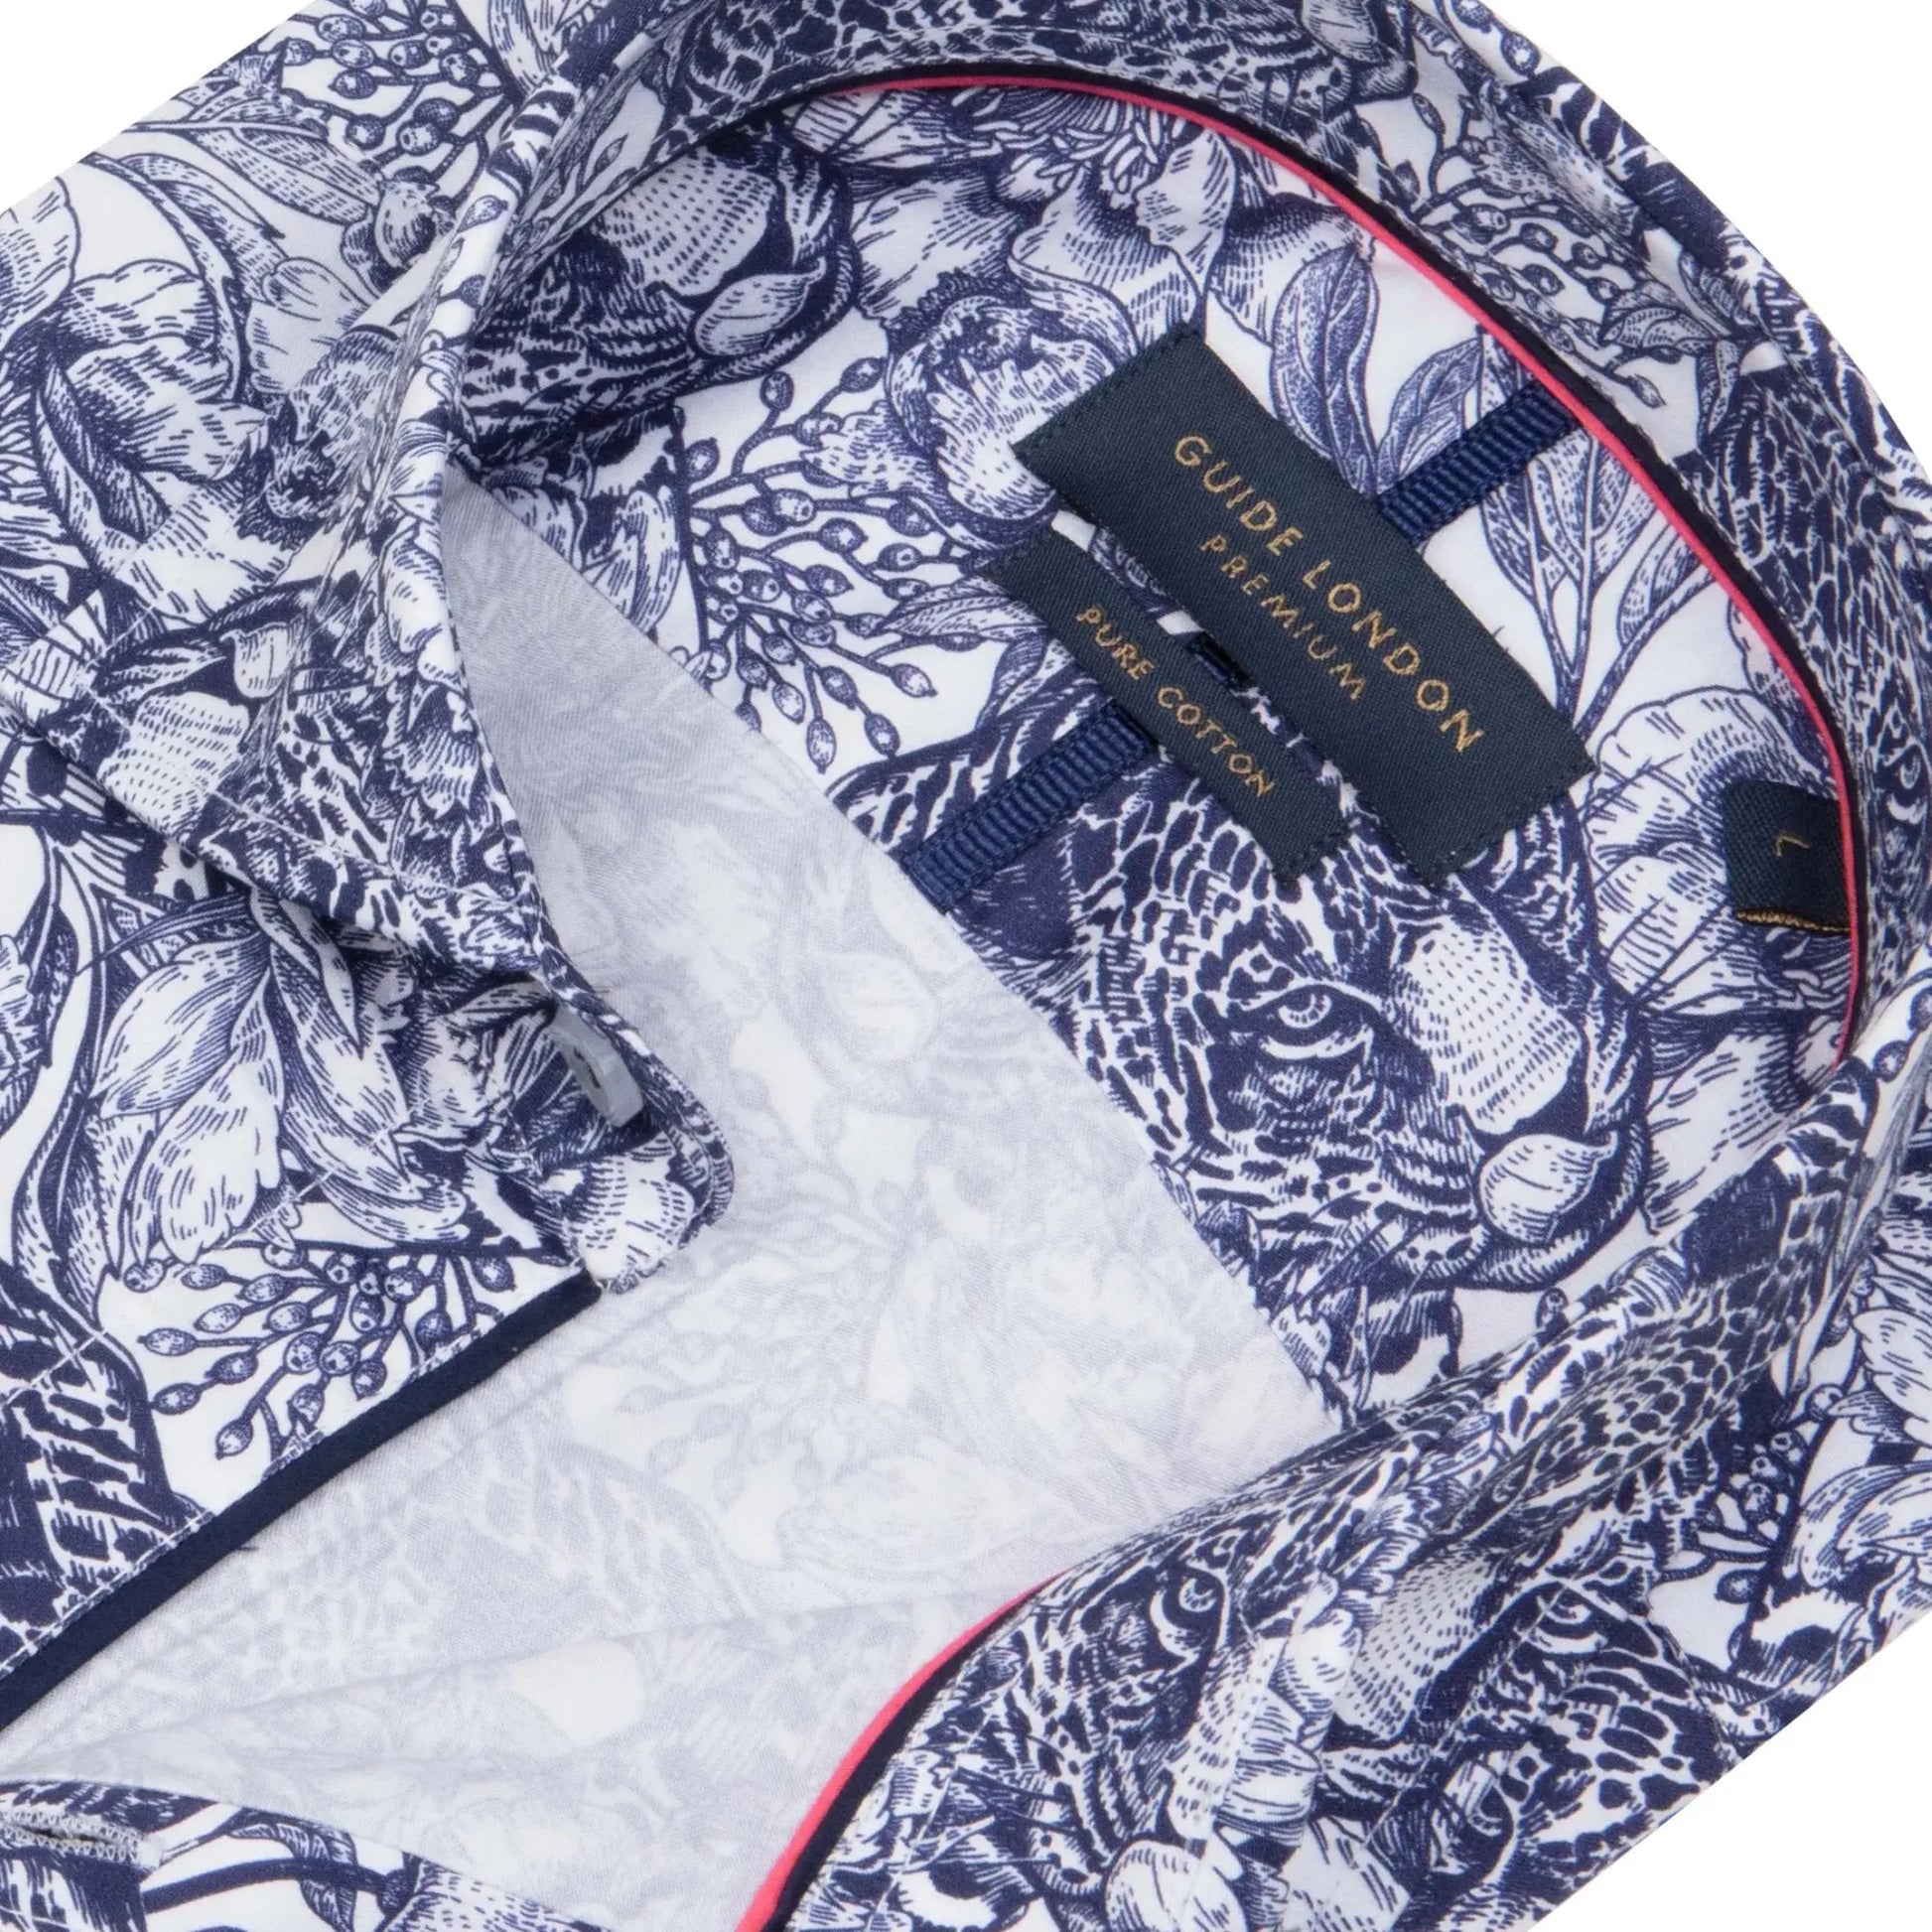 Buy Guide London Floral Leopard Print Shirt - White/Navy | Long-Sleeved Shirtss at Woven Durham